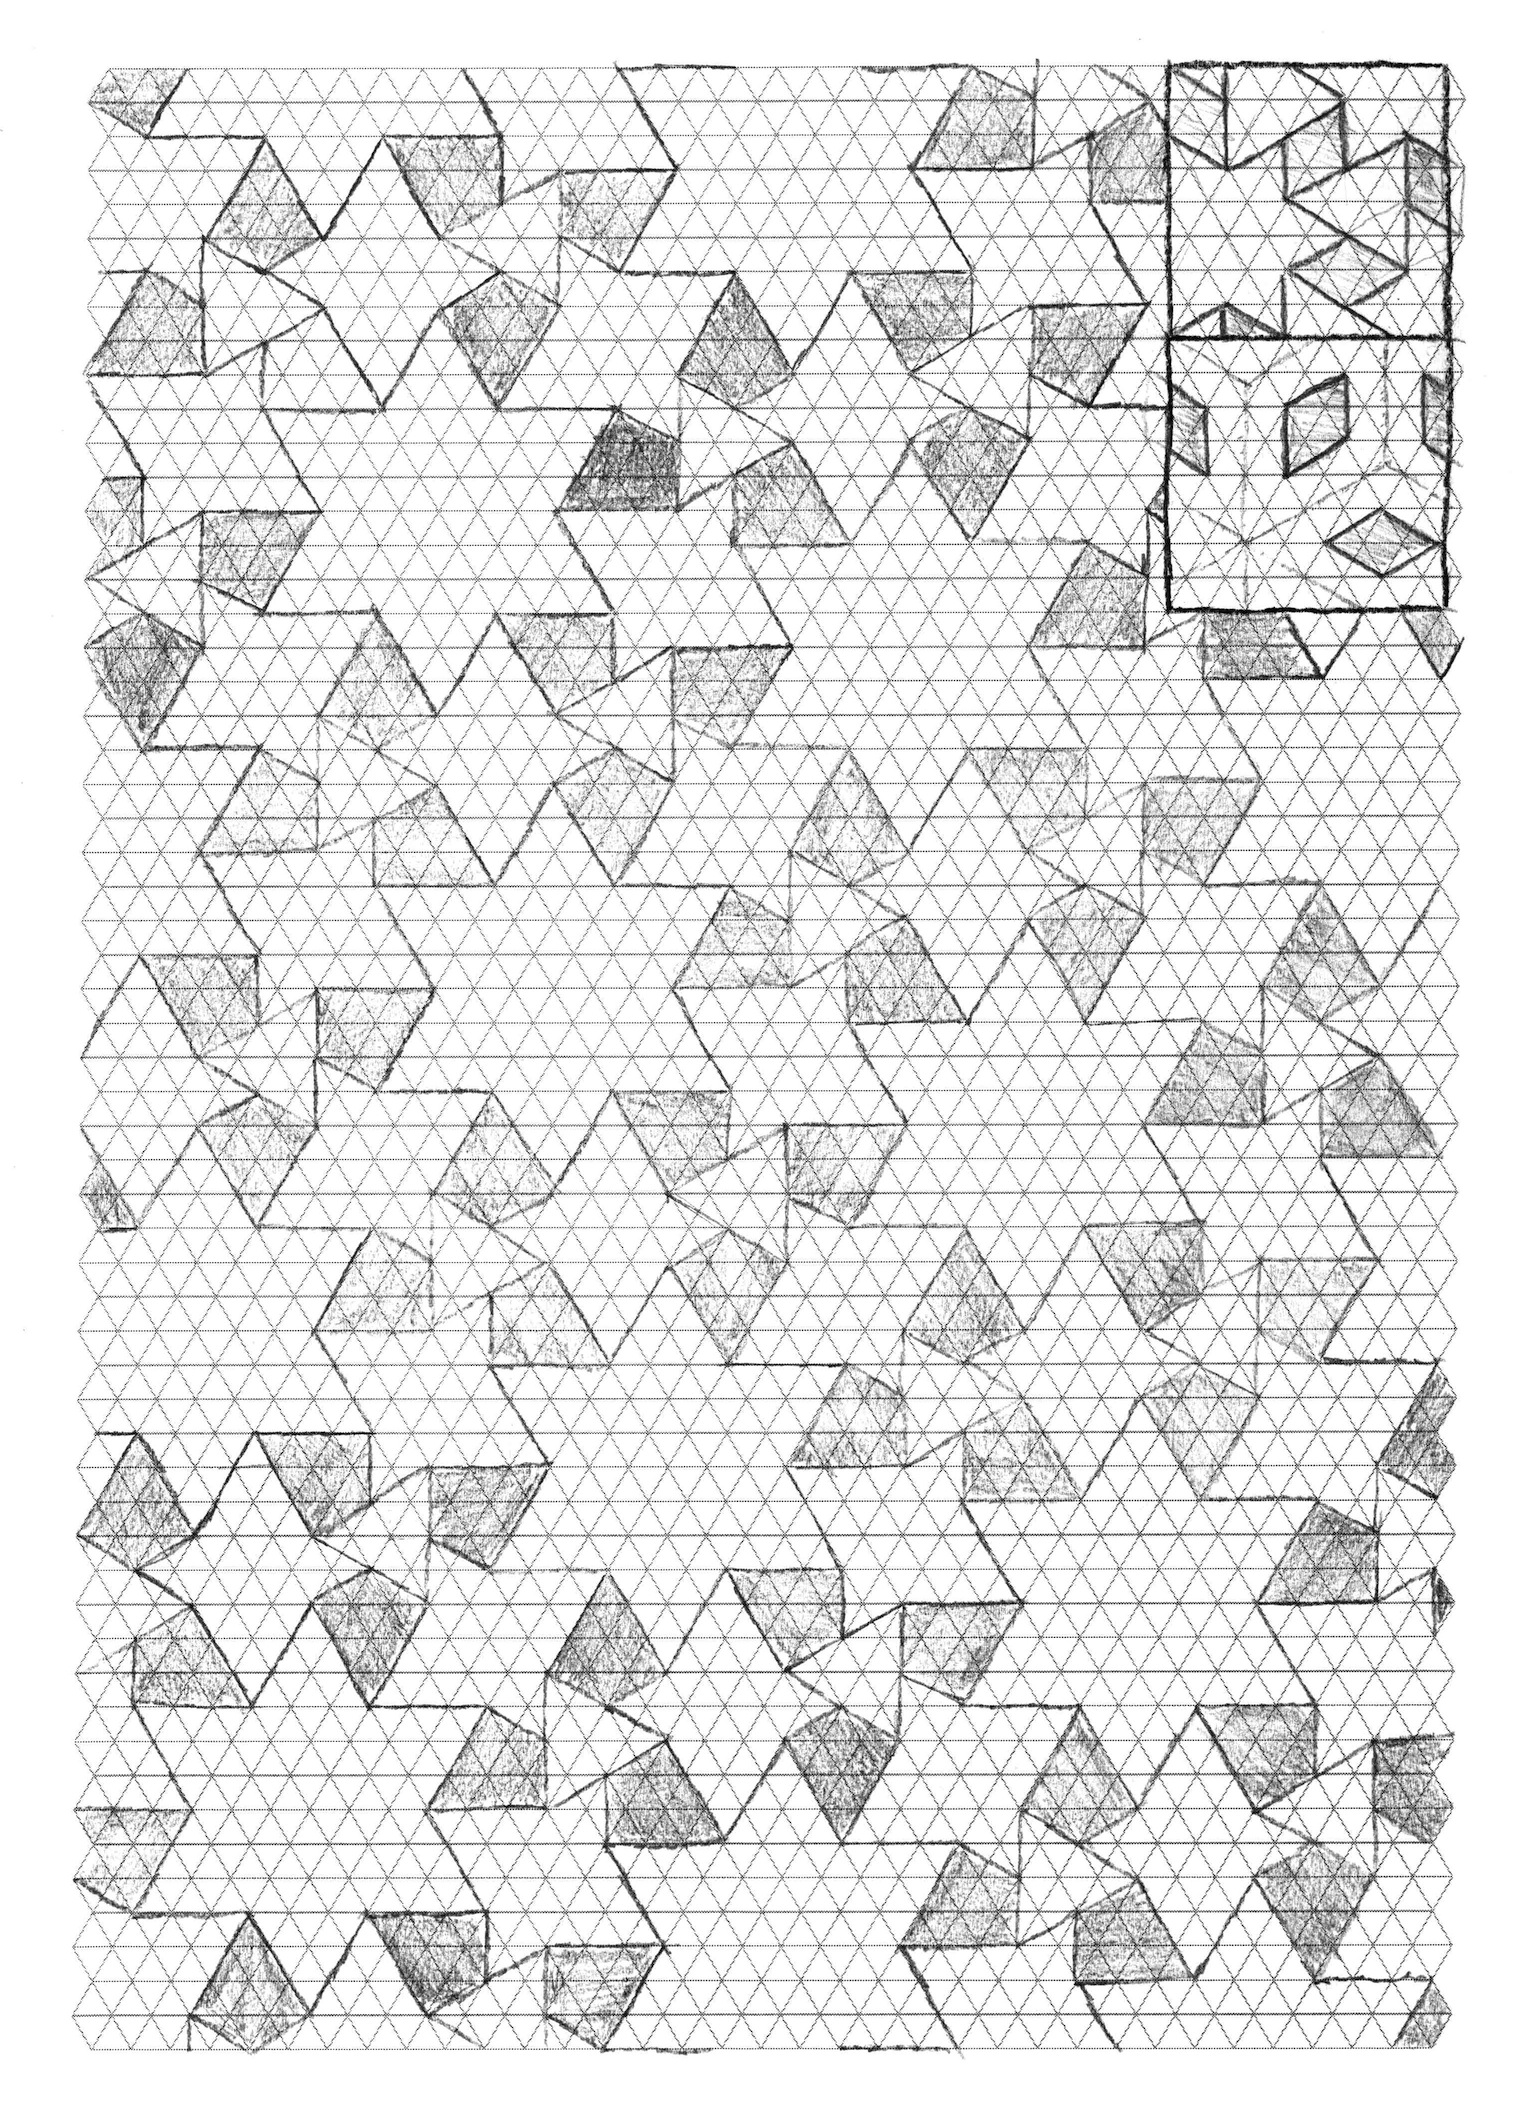 Thinking Sketches - 3.4.6.4 Waterbomb-Flagstone Tessellation